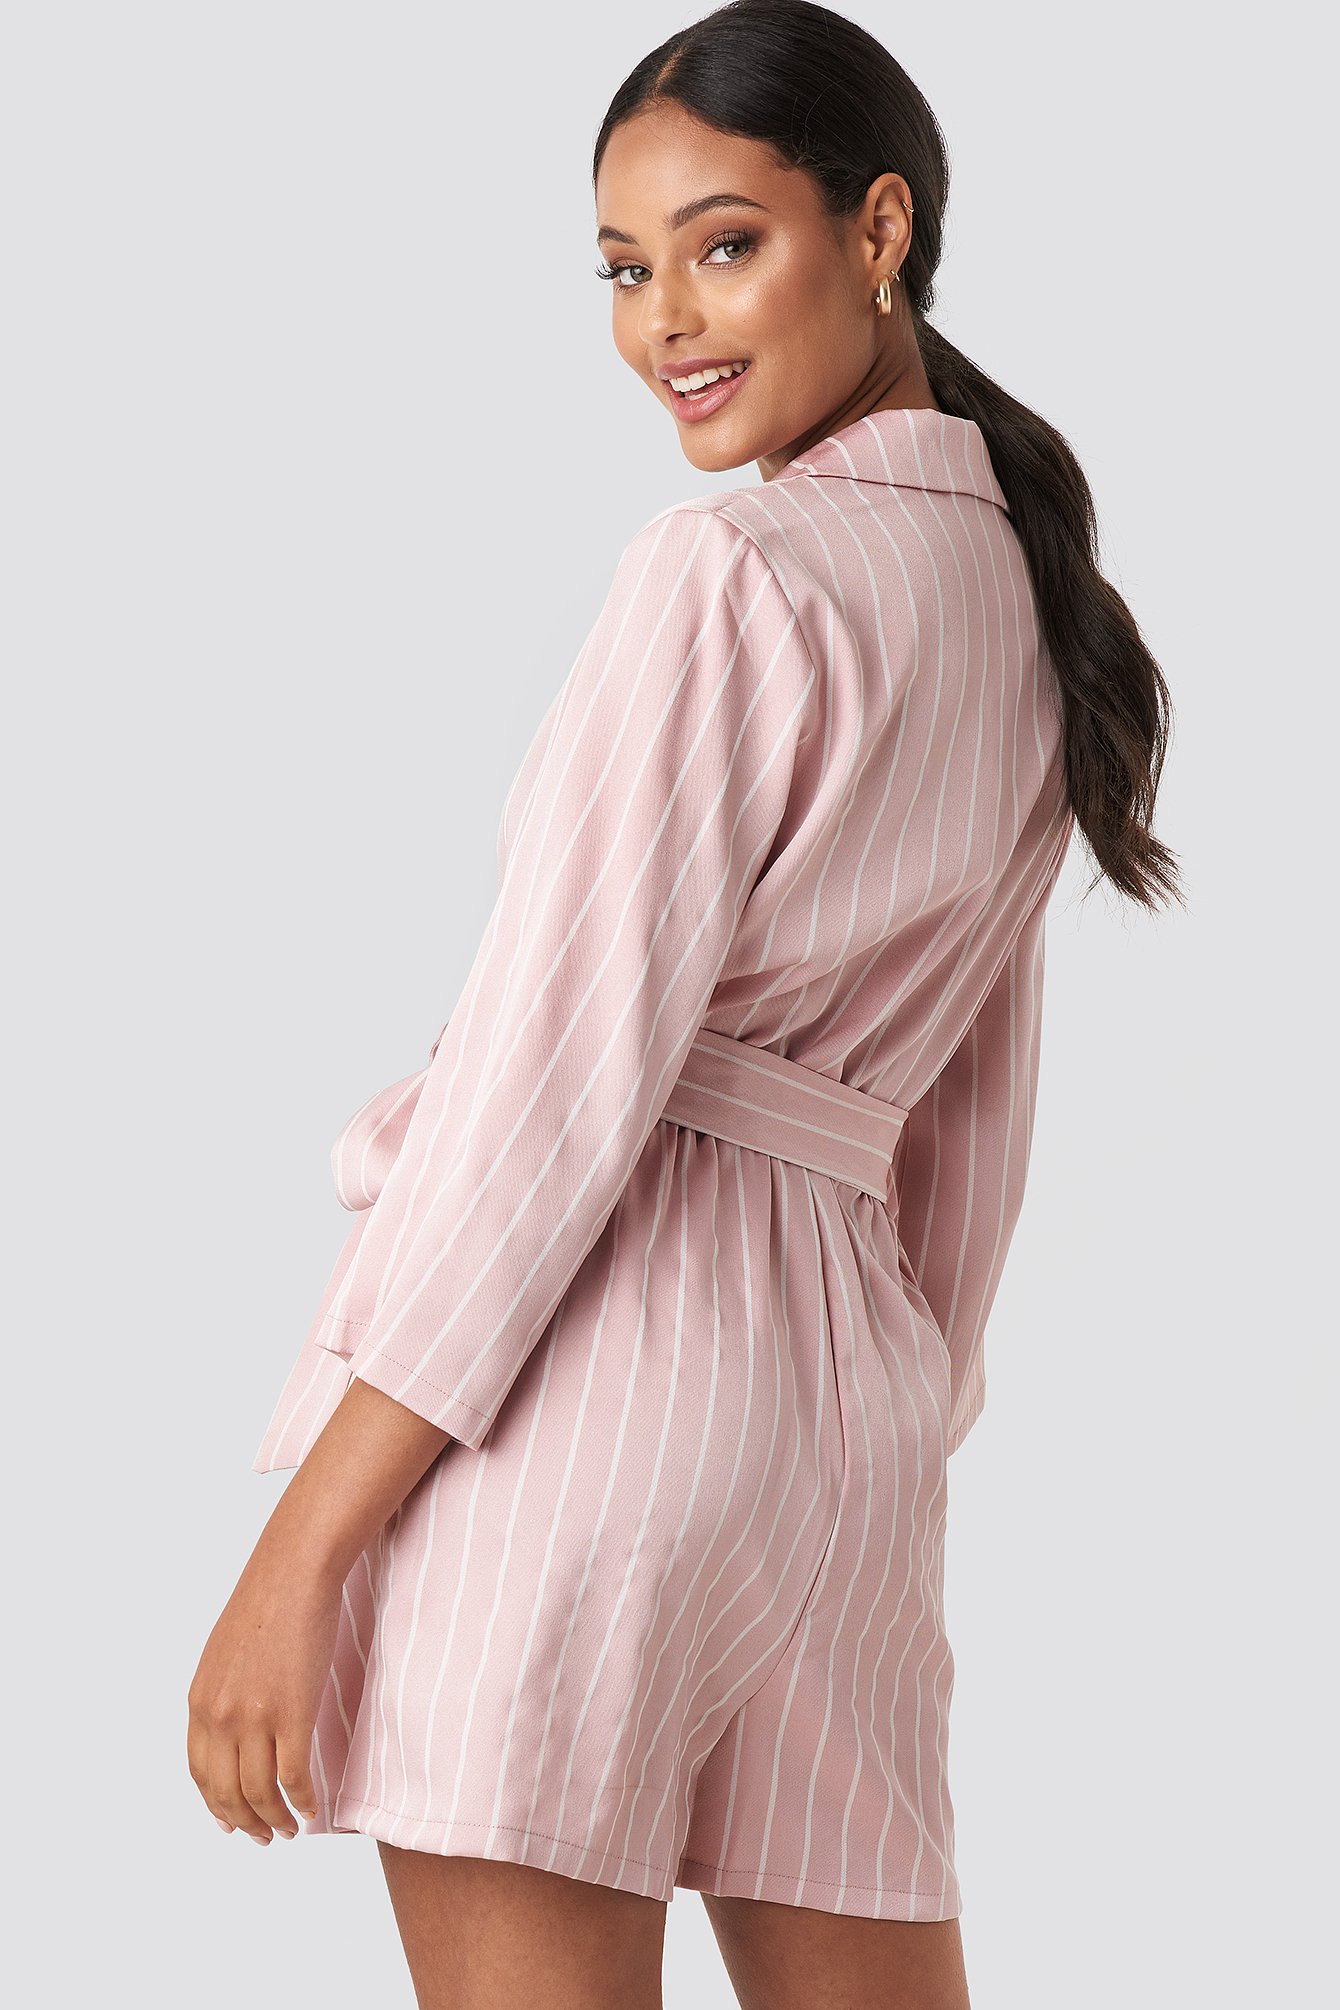 Pink Striped Playsuit